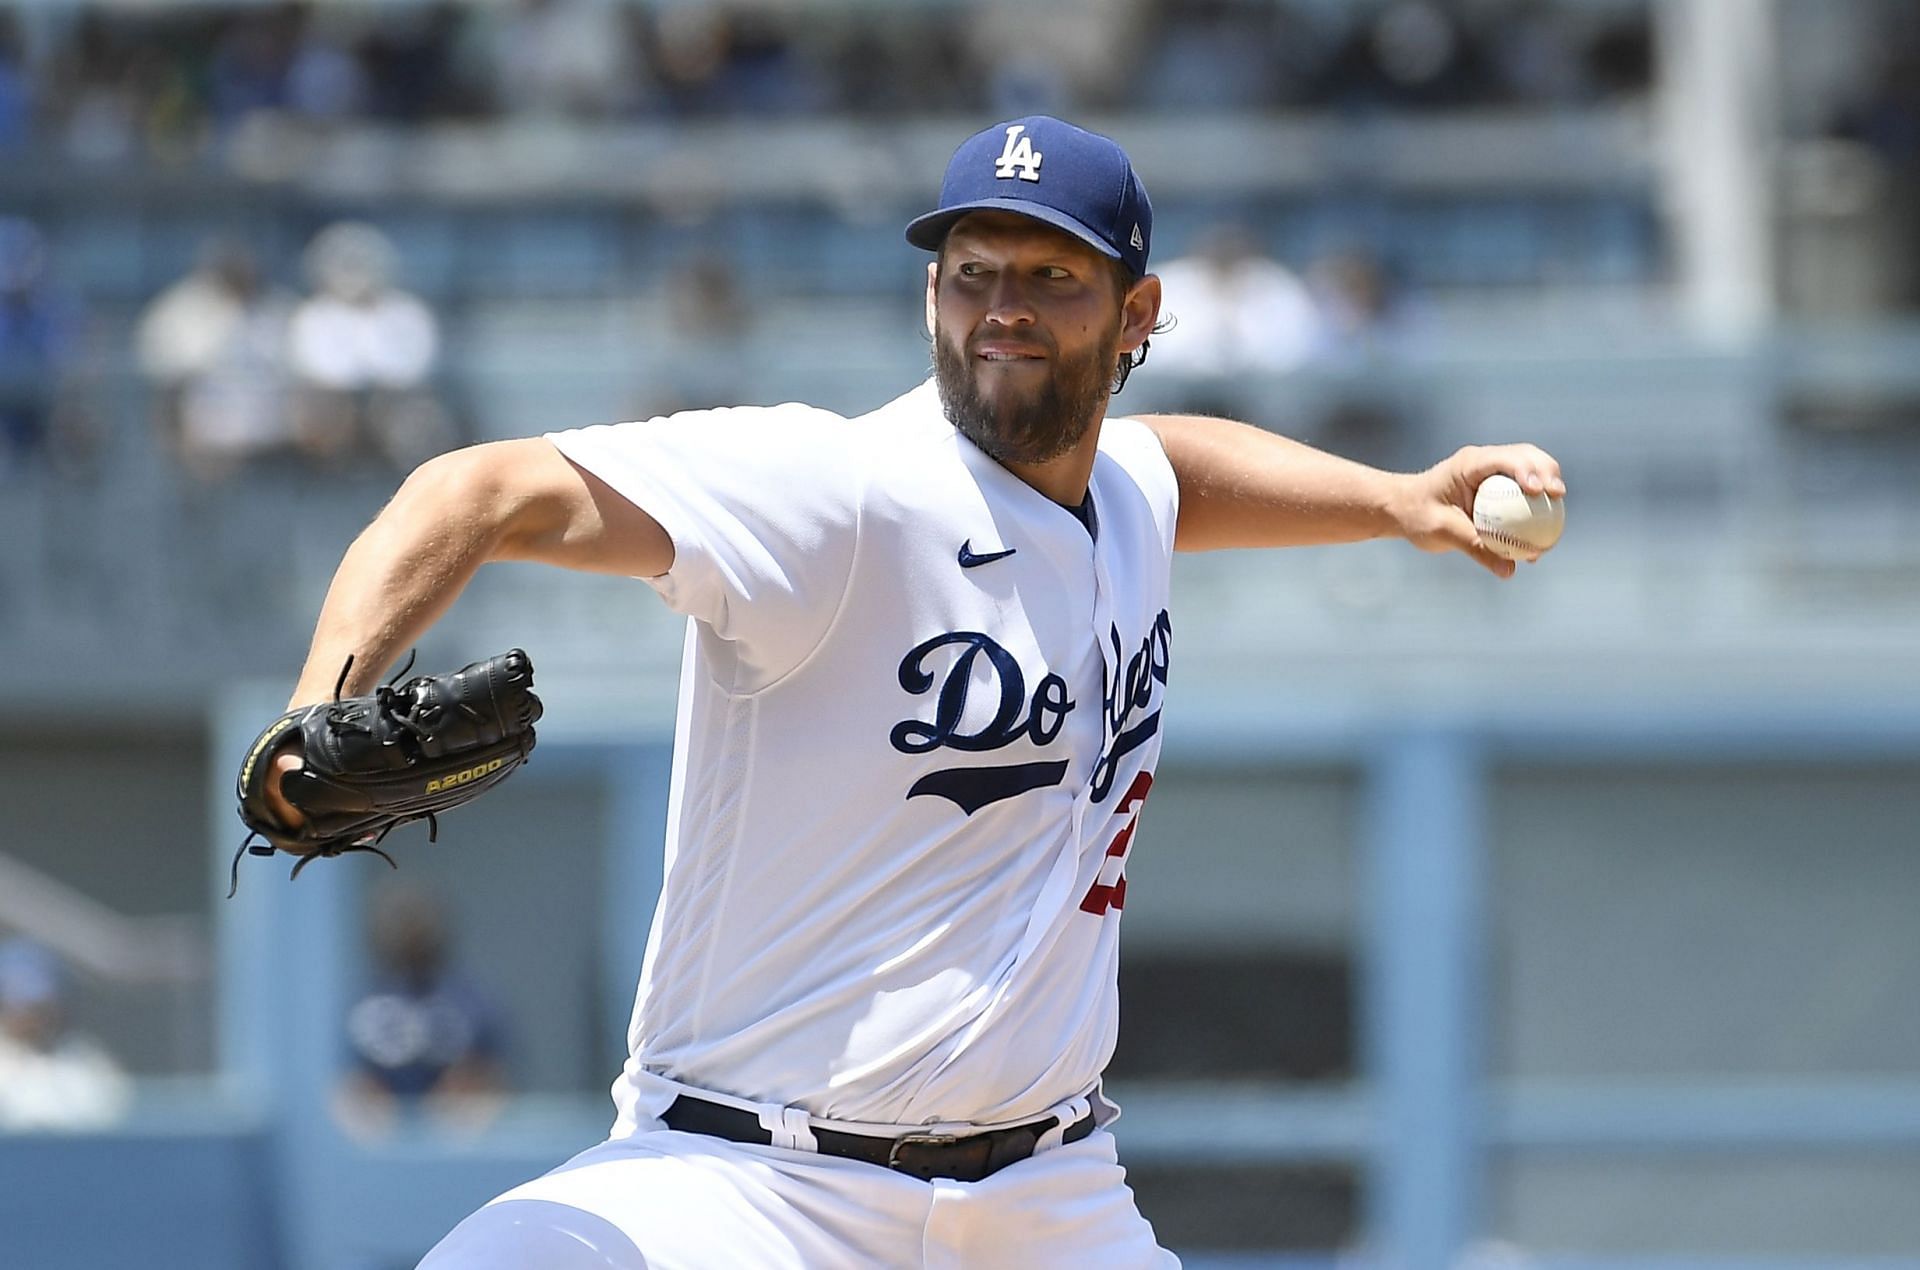 Clayton Kershaw is still one of the top pitchers in baseball.